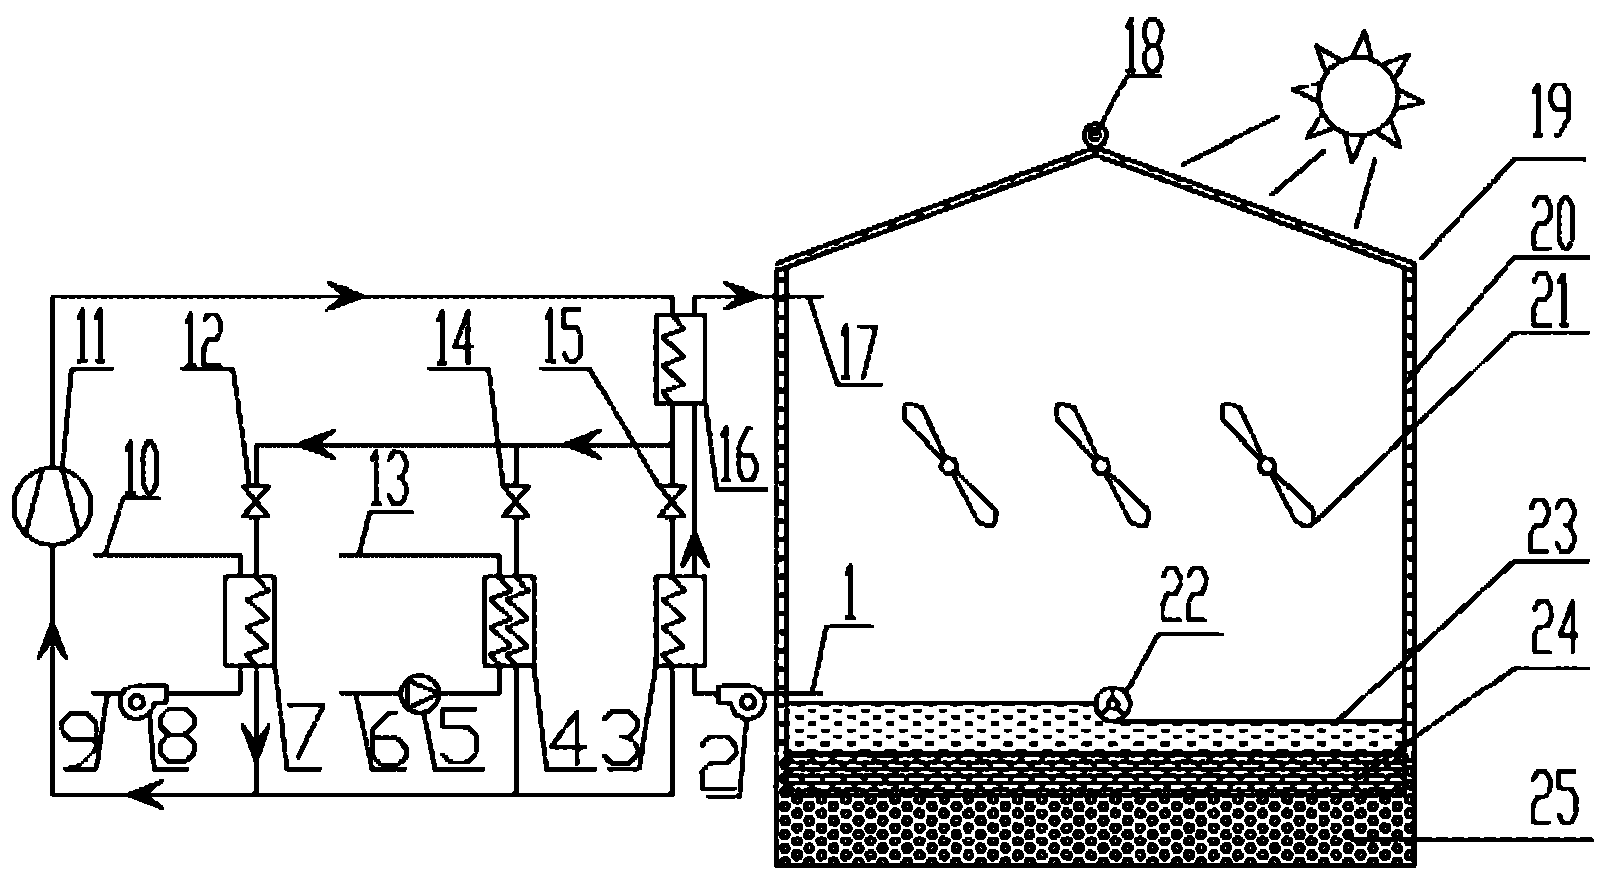 Sludge drying system of combined solar energy and multi-coupled heat pump